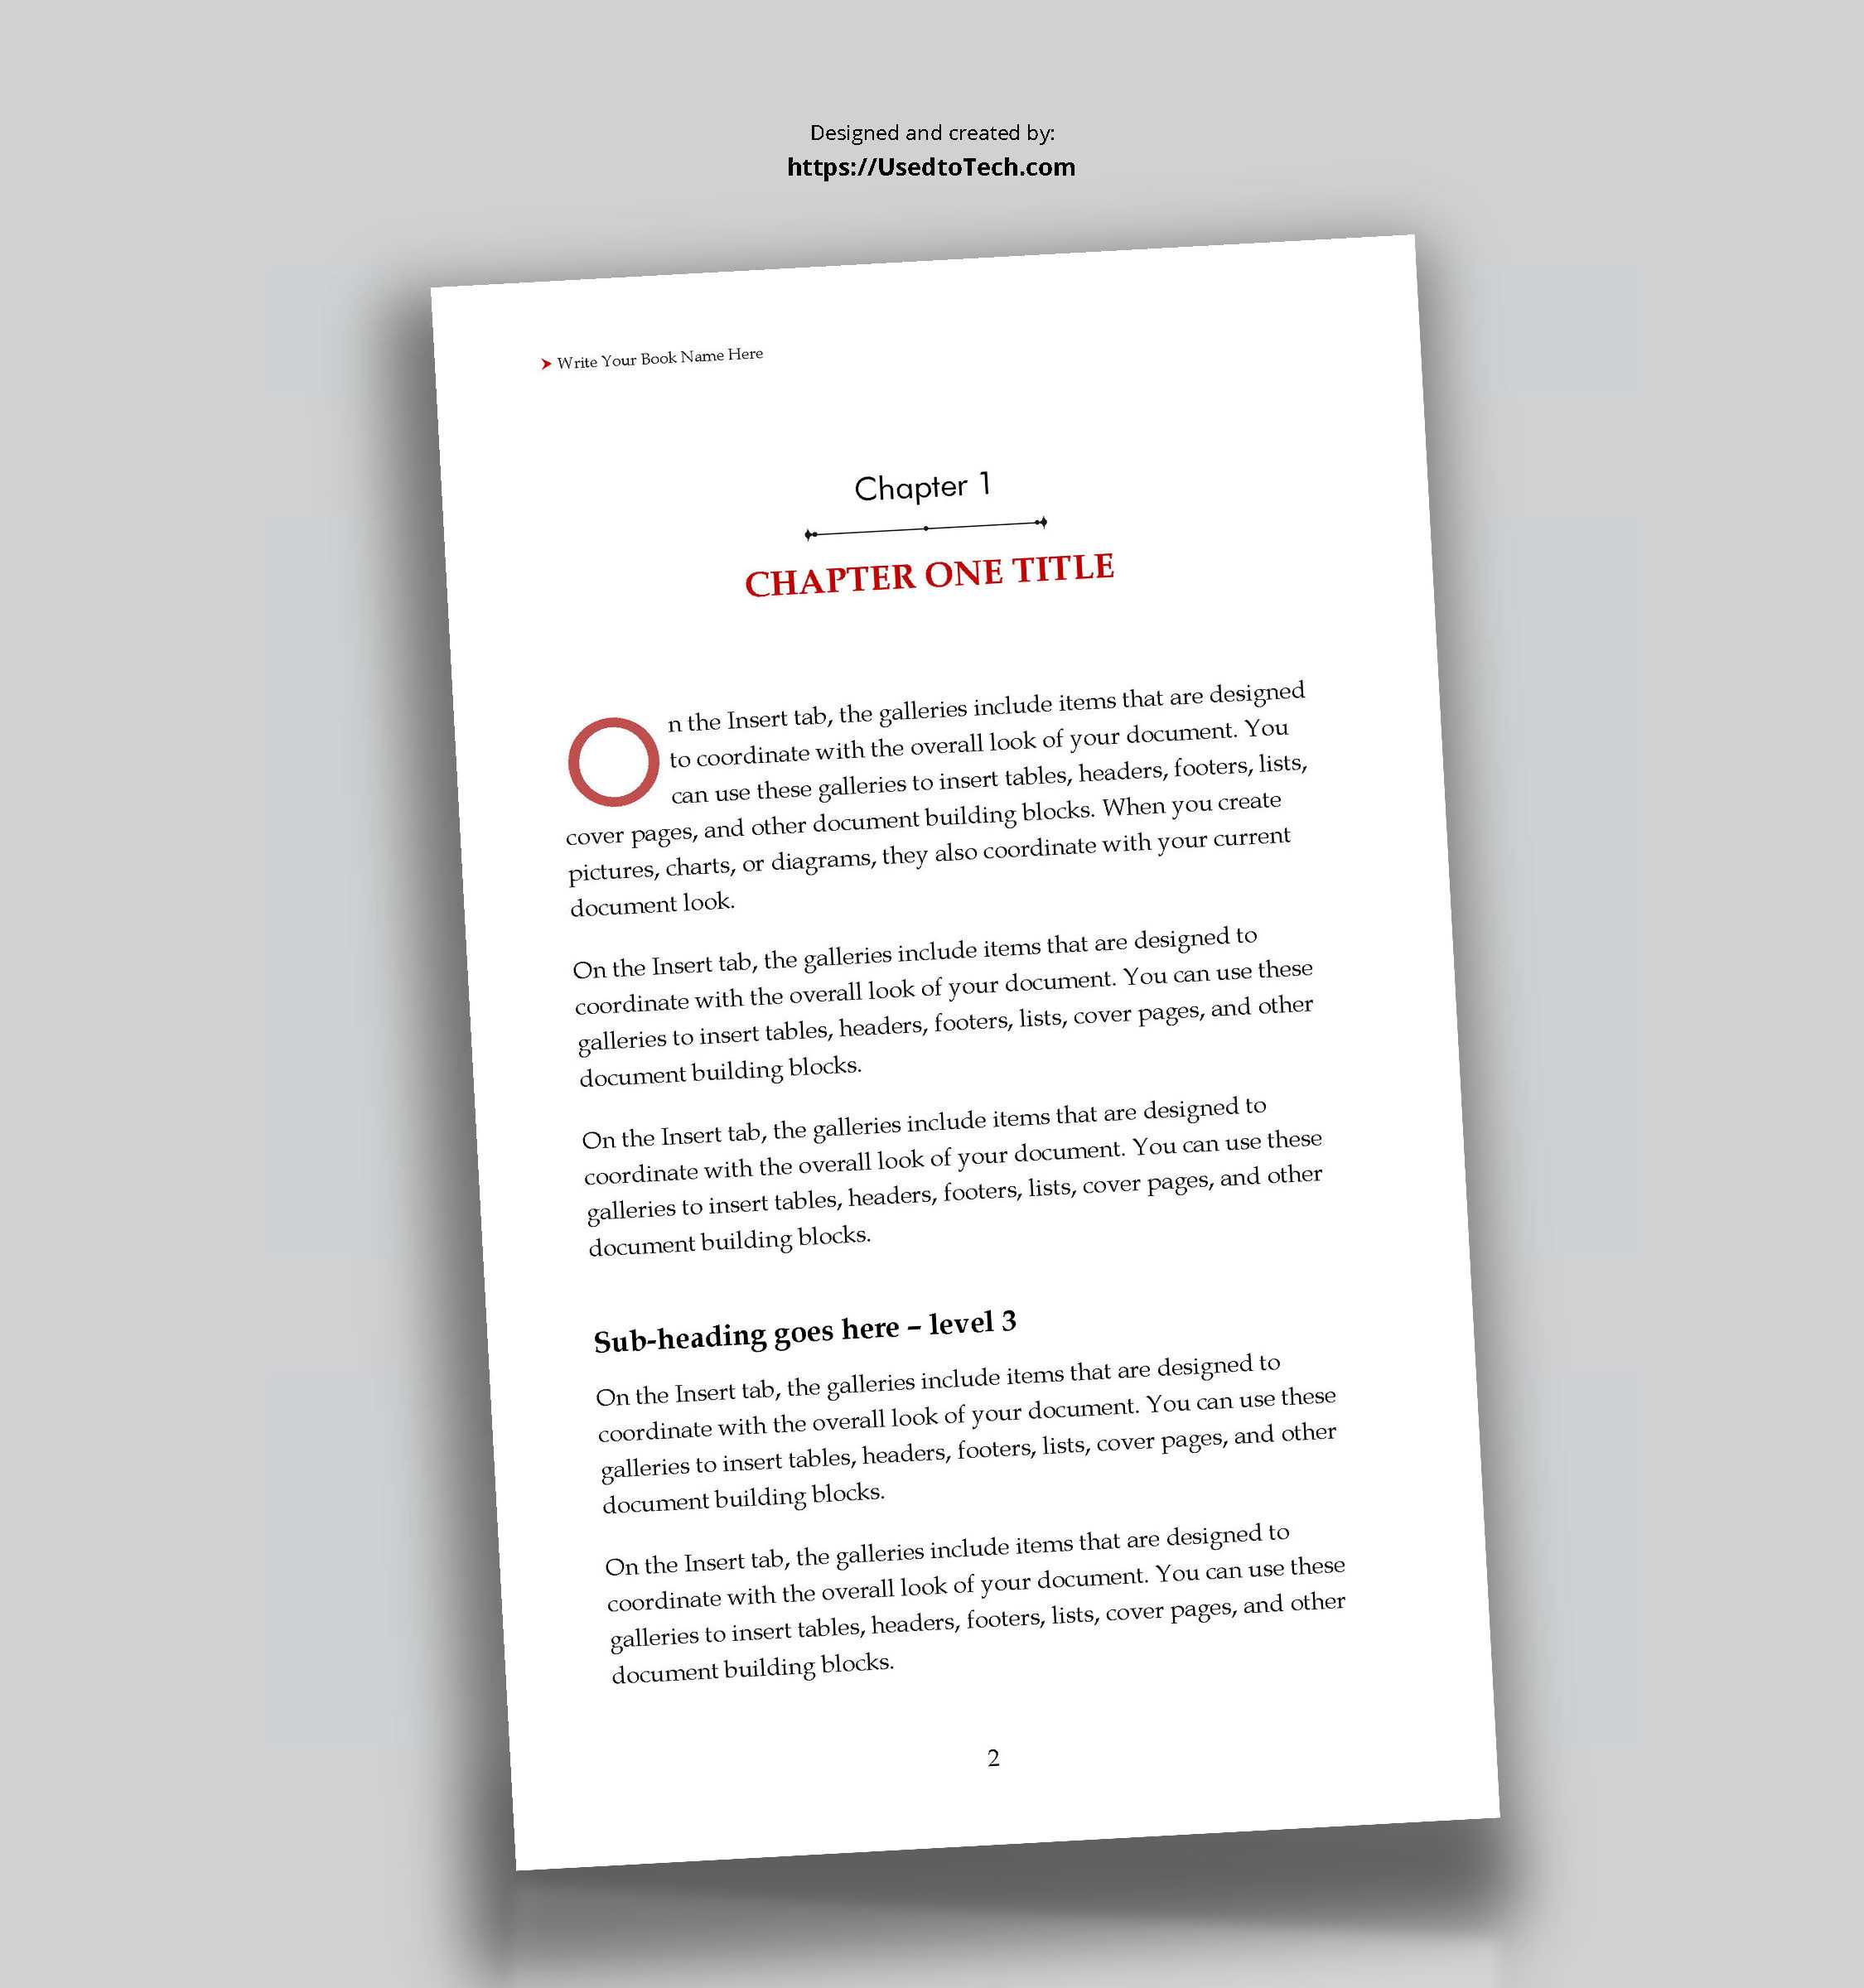 5 X 8 Editable Book Template In Word – Used To Tech Throughout How To Create A Book Template In Word